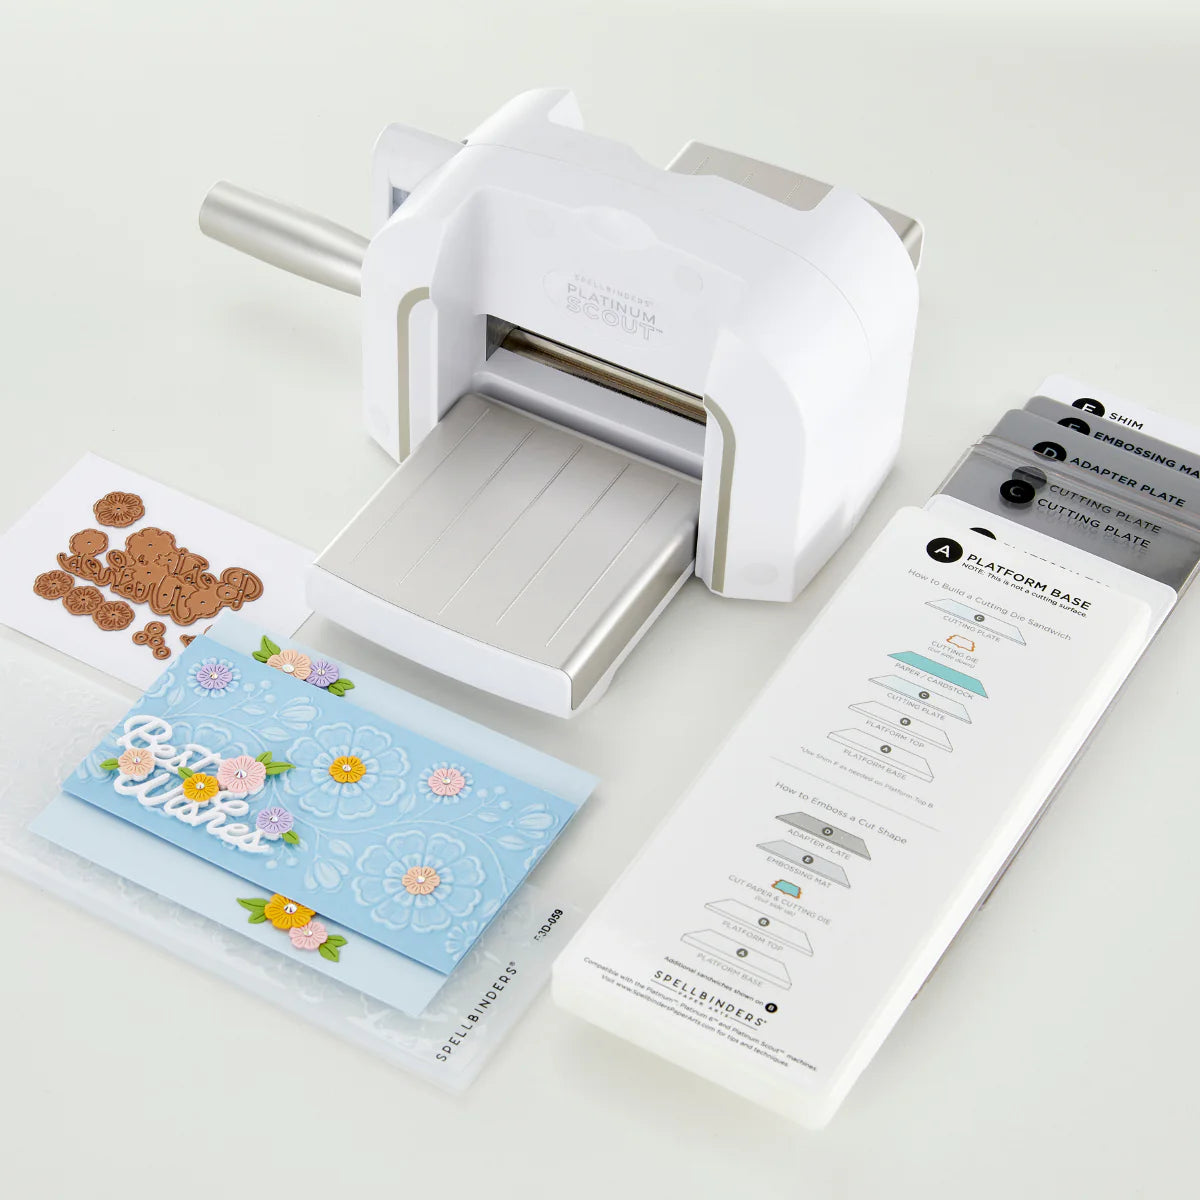 Platinum Scout Compact Die Cutting and Embossing Machine